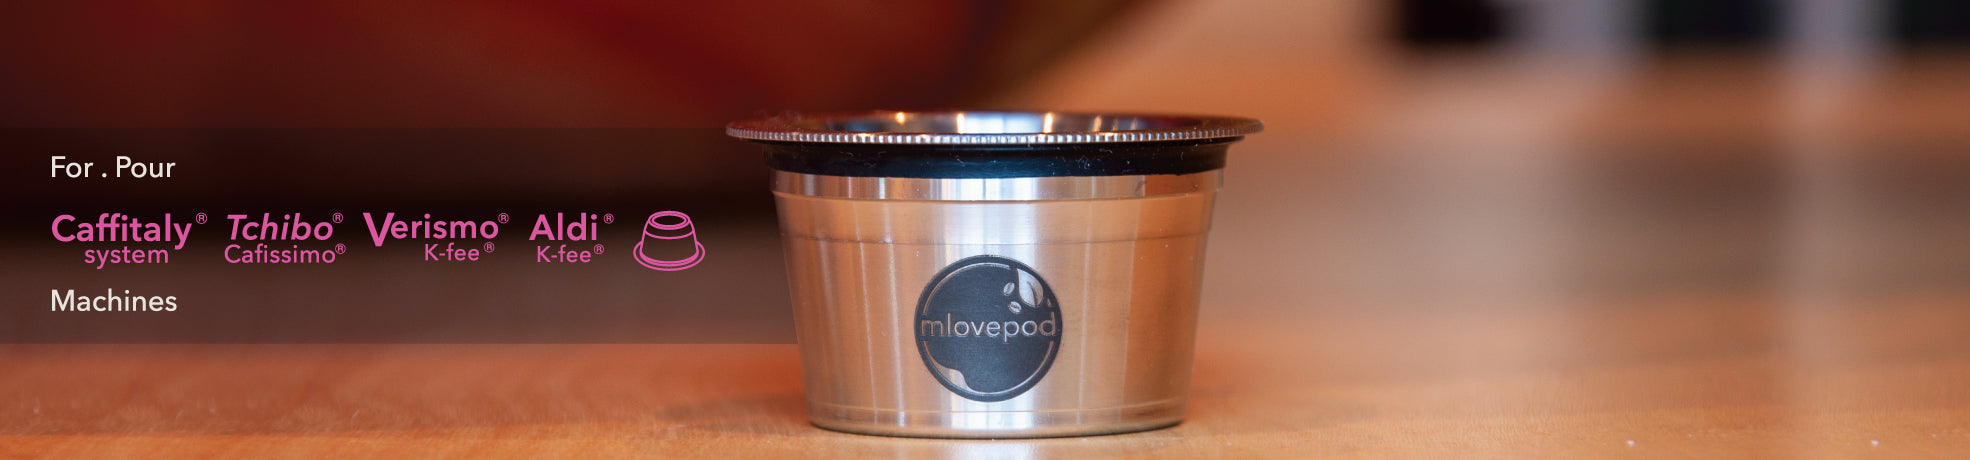 mlovepod is a Reusable and Refillable stainless steel Eco-Friendly coffee capsules for Nespresso, illy, Caffitaly, Aldi